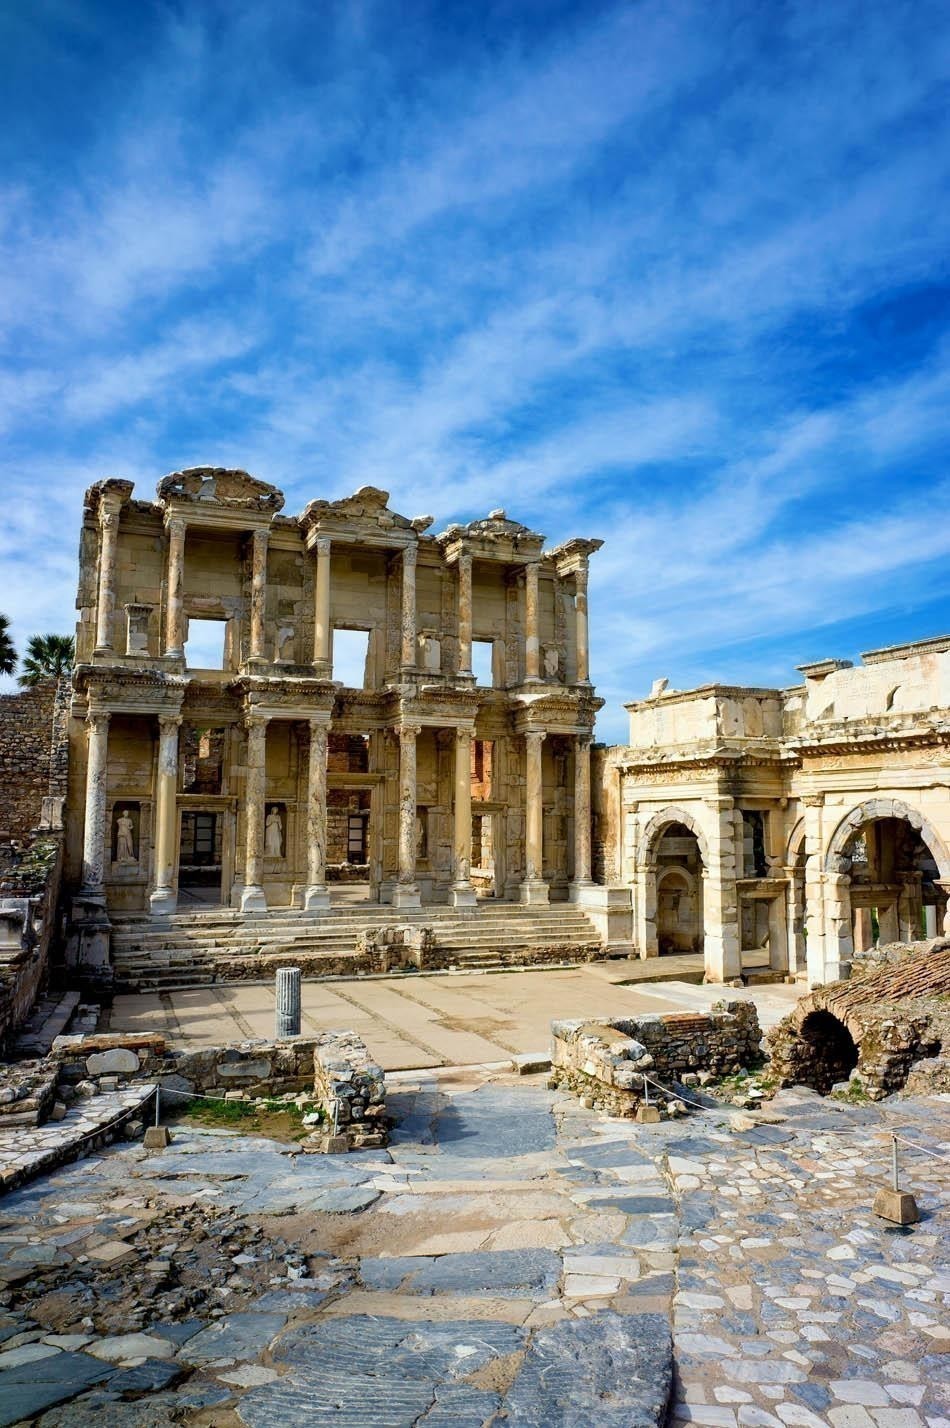 Library of Celsus in Ephesus ancient city, UNESCO world heritage site in Selcuk, Turkey | Turkey Travel Guide